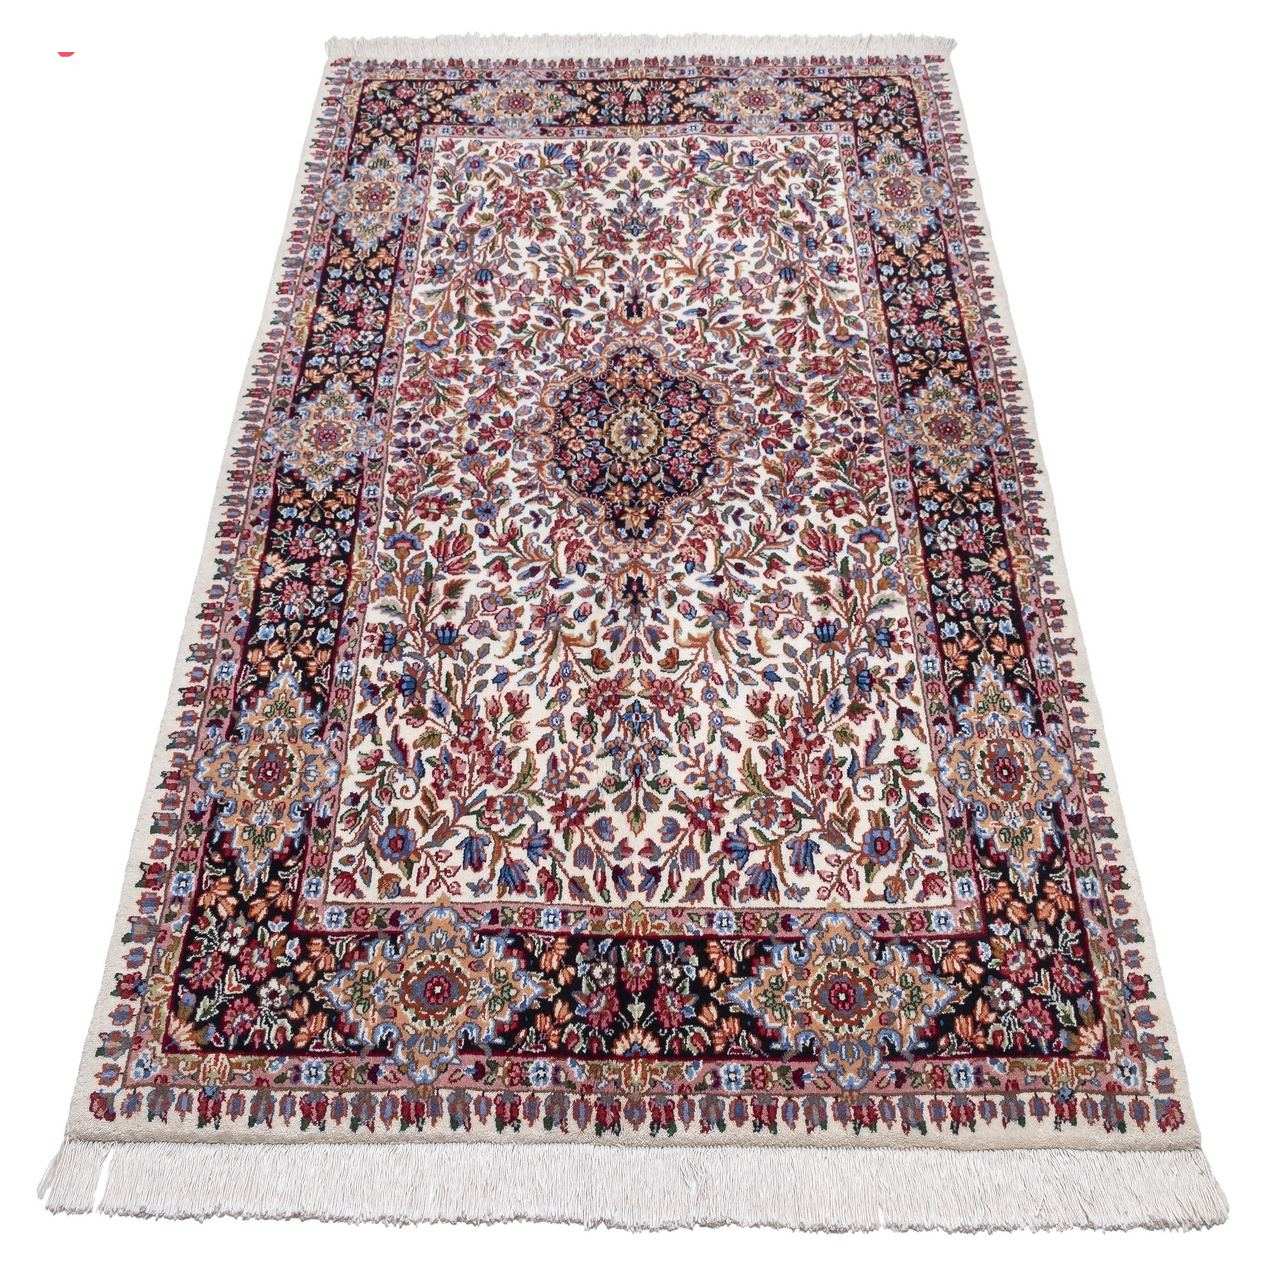 Two and a half meter handmade carpet by Persia, code 174364